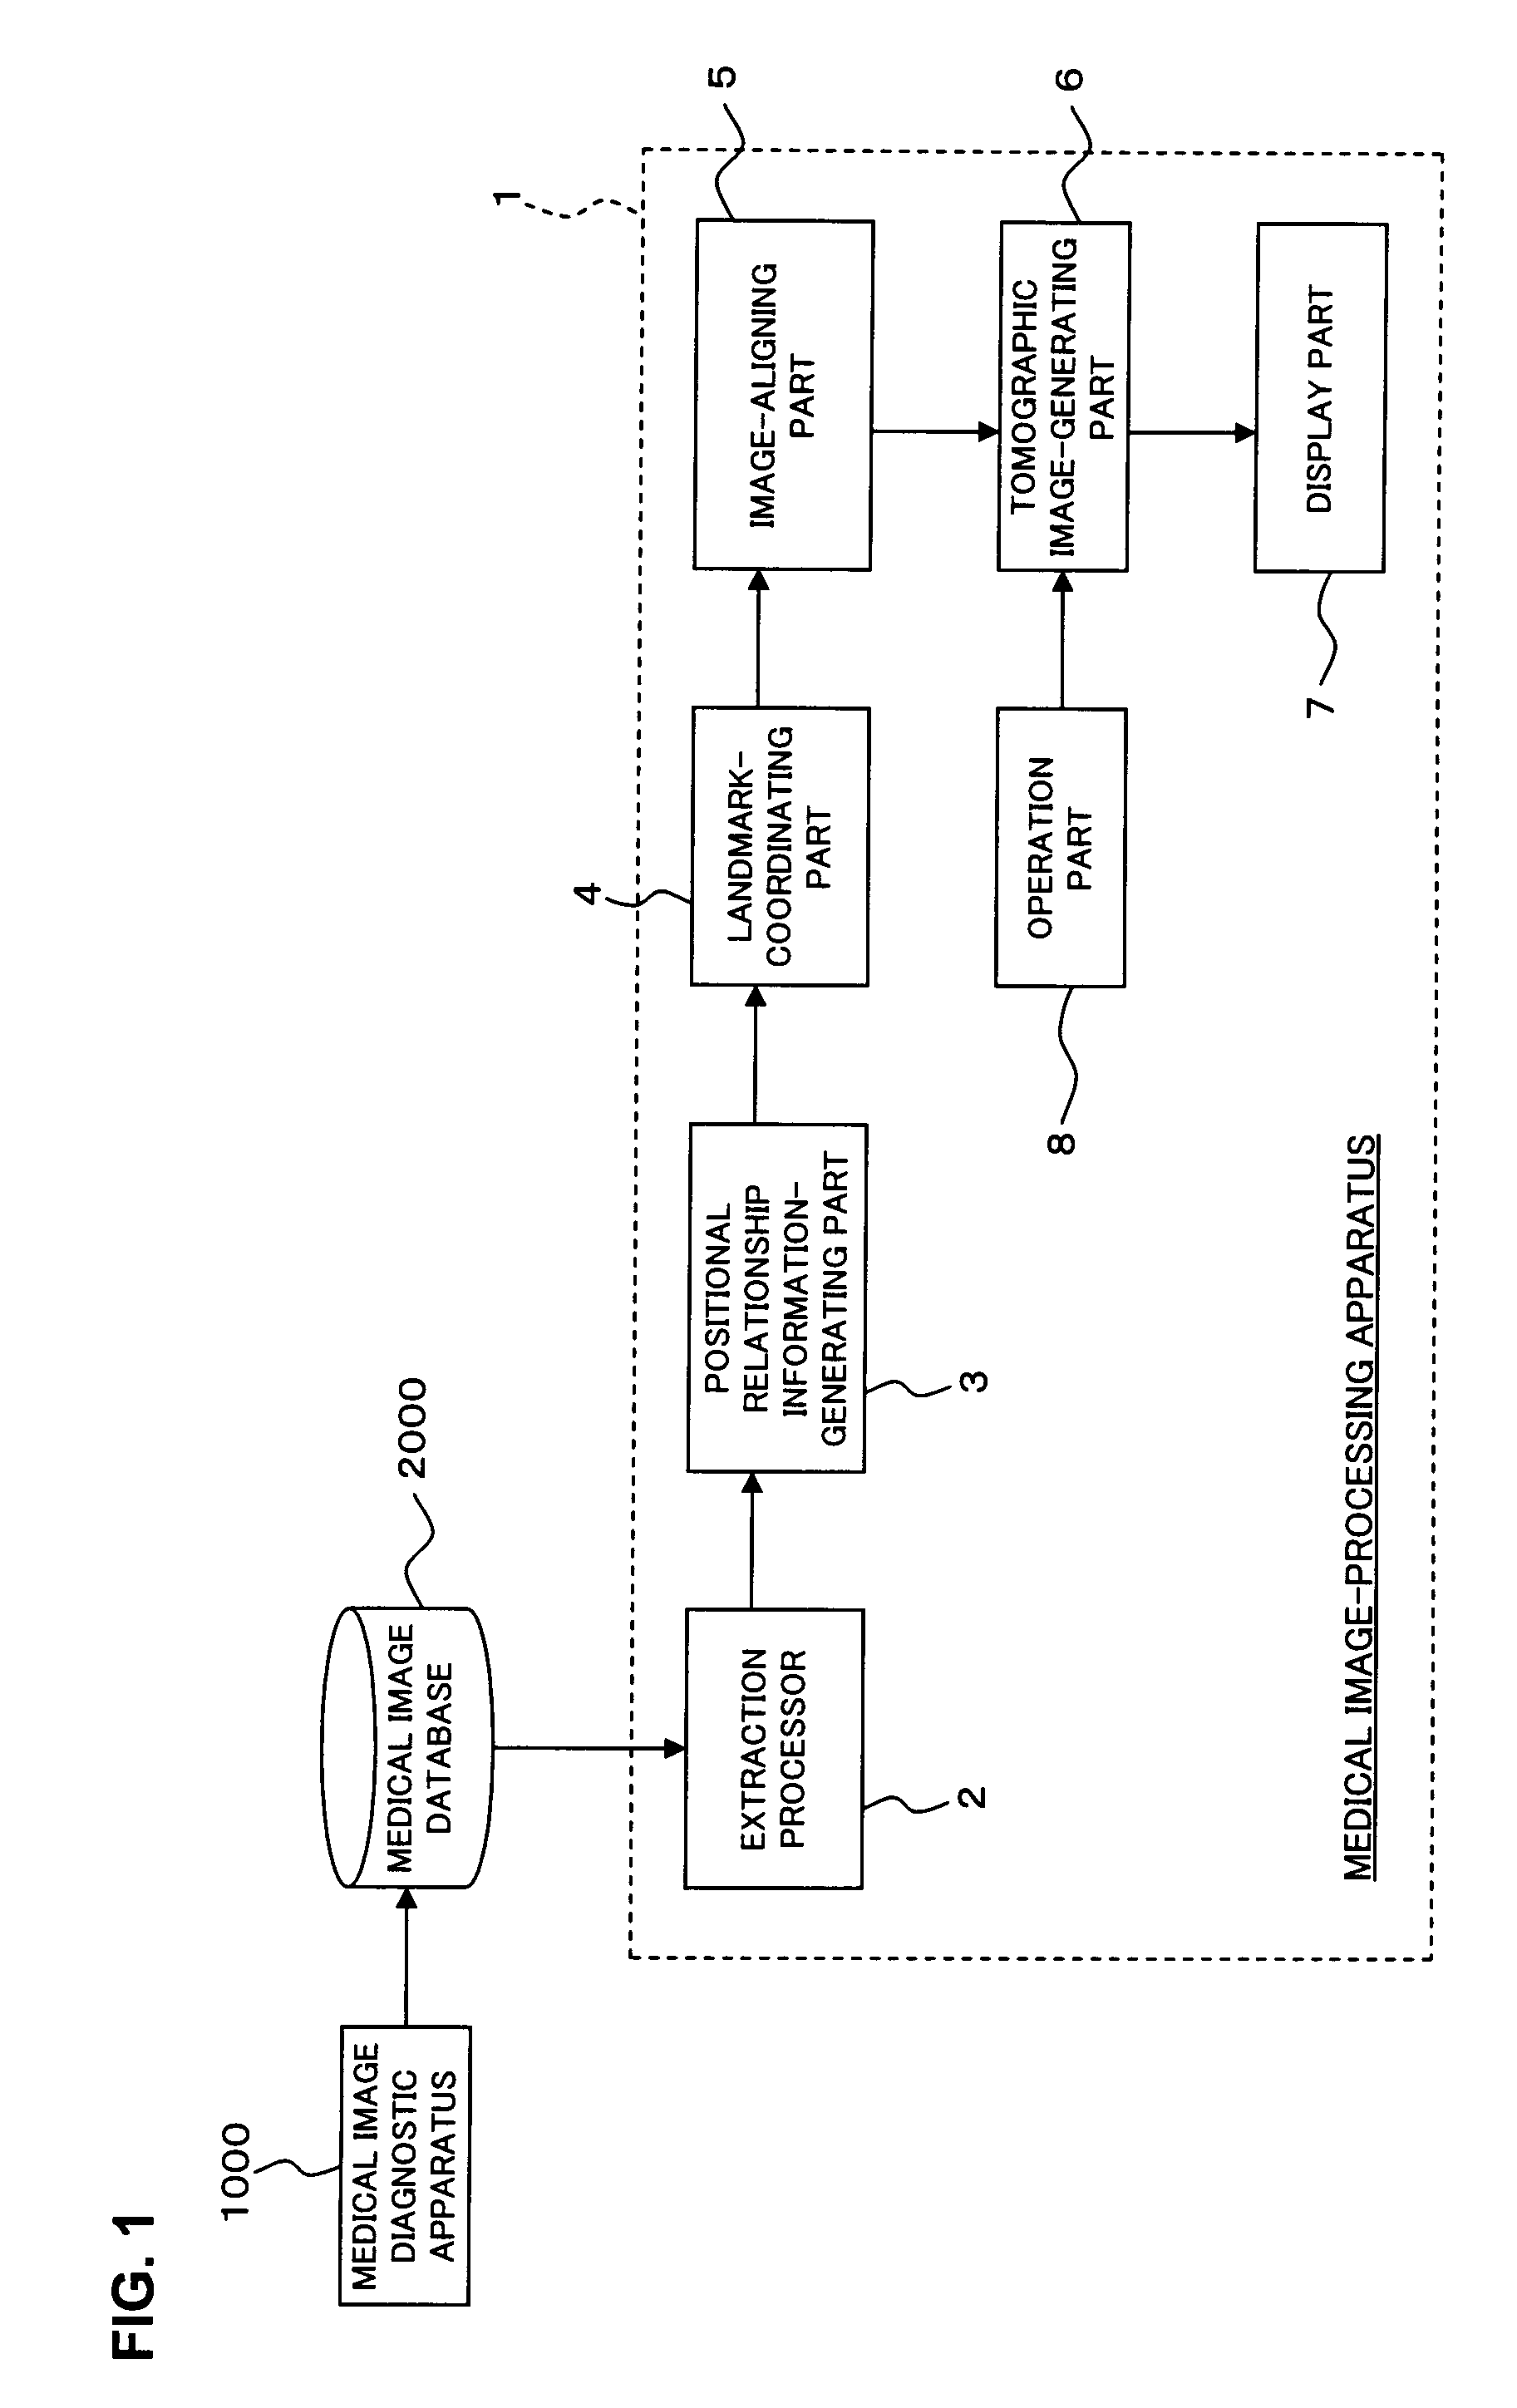 Medical image-processing apparatus and a method for processing medical images